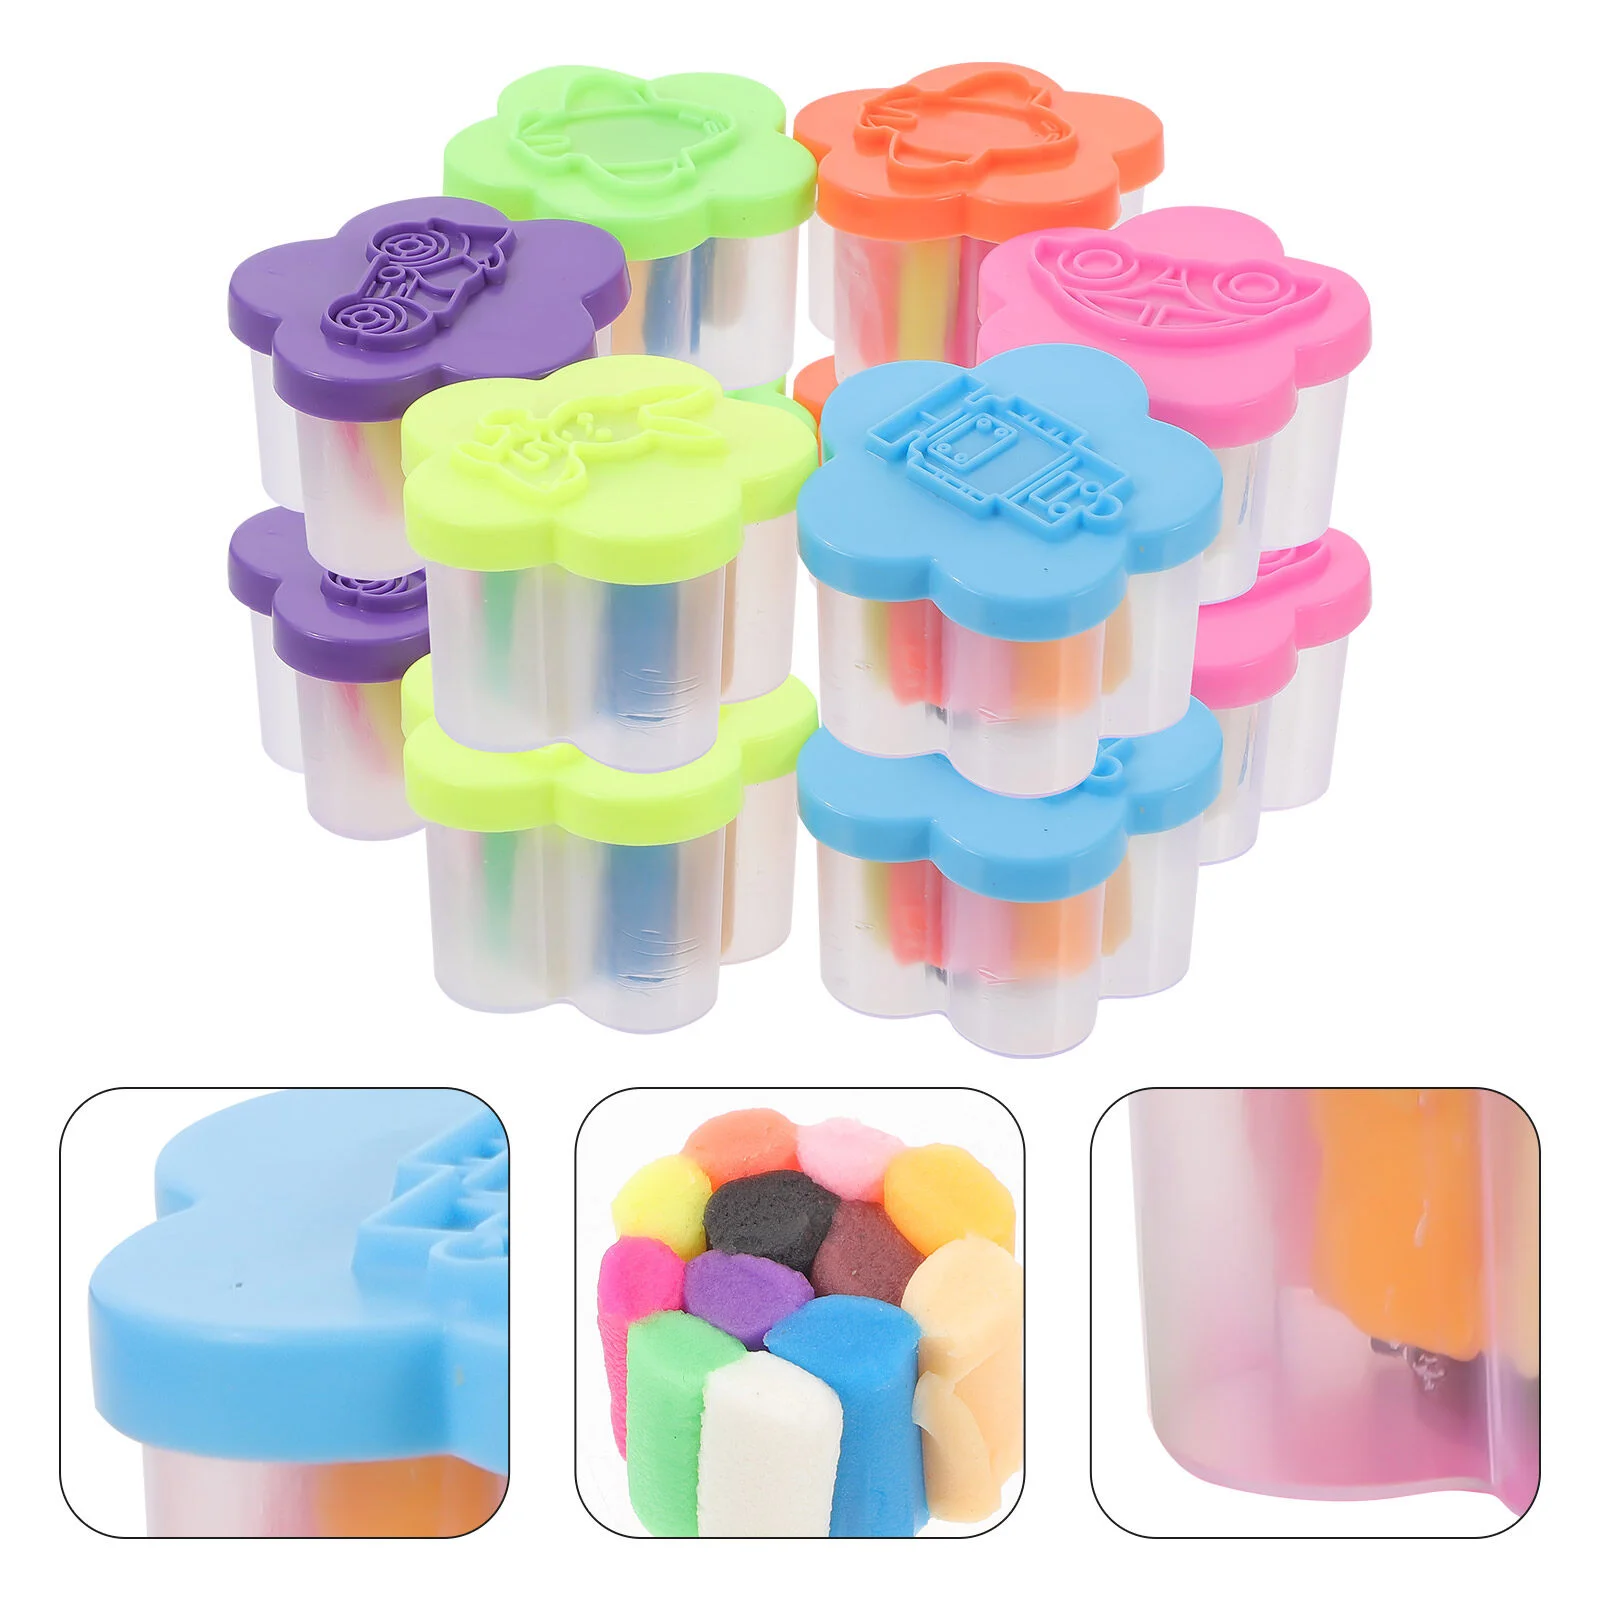 

Bright Color Clay Set Modeling Clays For Toddler Plaything Kid Playthings Crafts